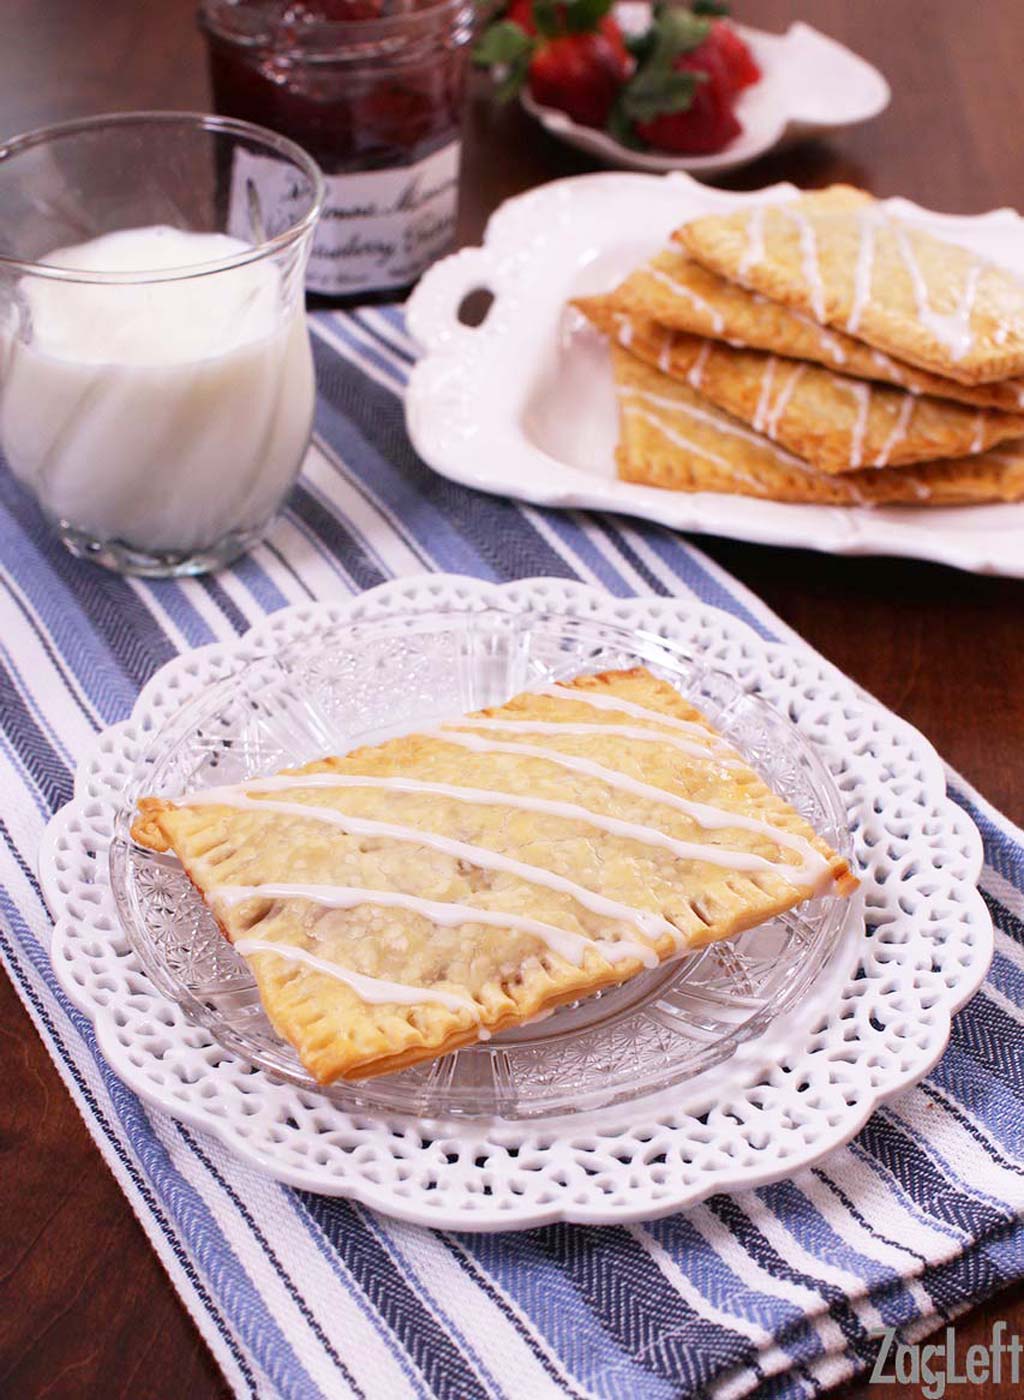 Homemade toaster pastries with icing stripes on a plate next to a glass of milk and a jar of jam.